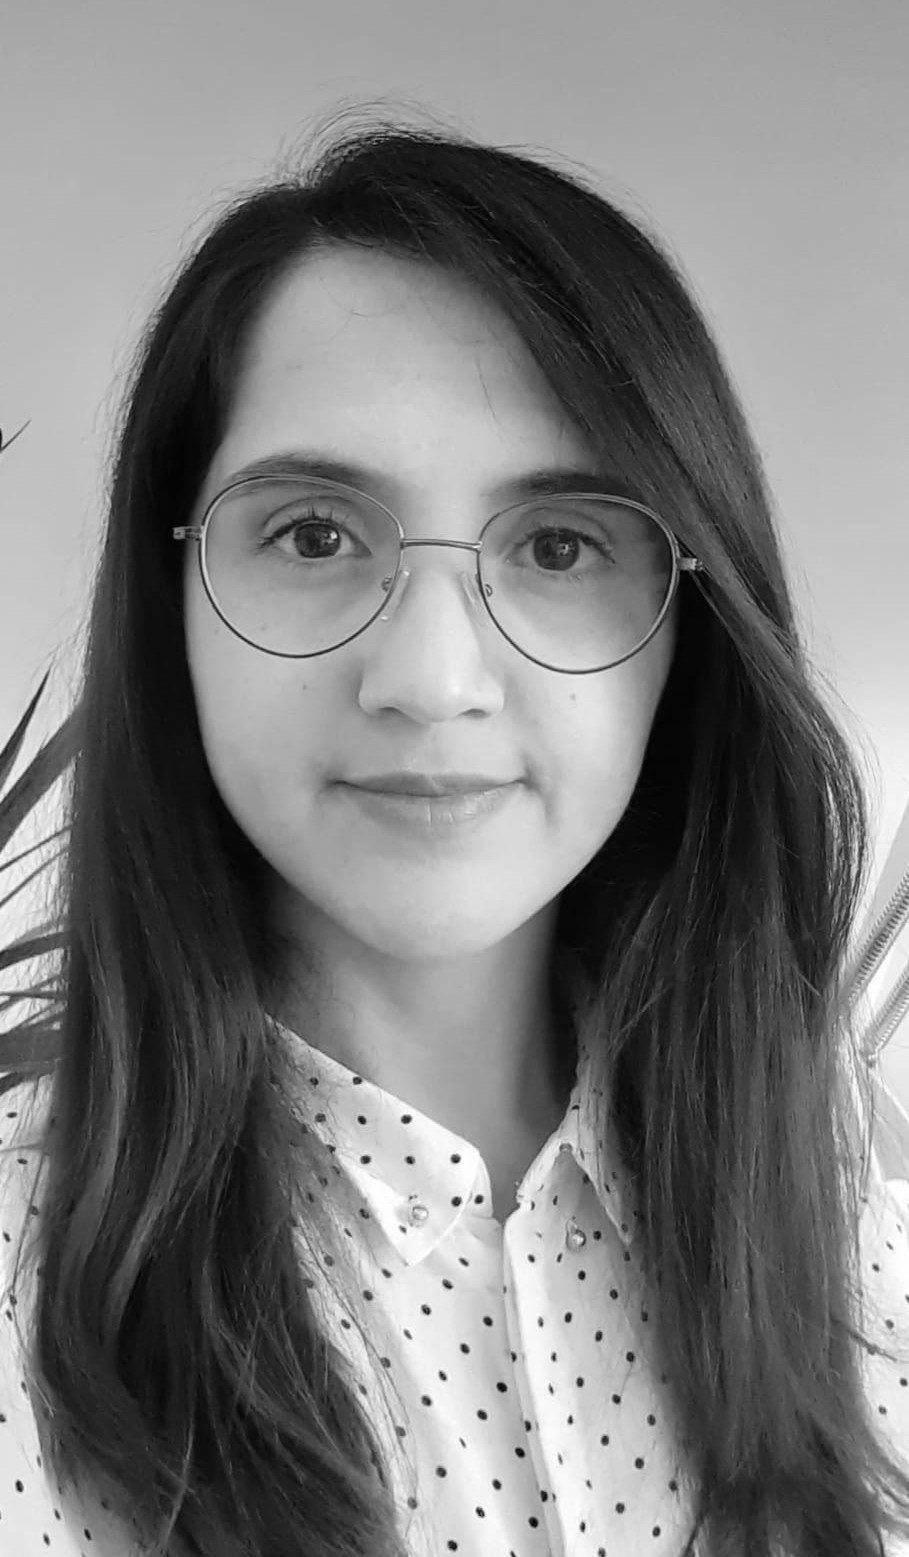 Medium shot of Guler Gulsen, a young woman with long black hair, wearing glasses and a white shirt with polka dots